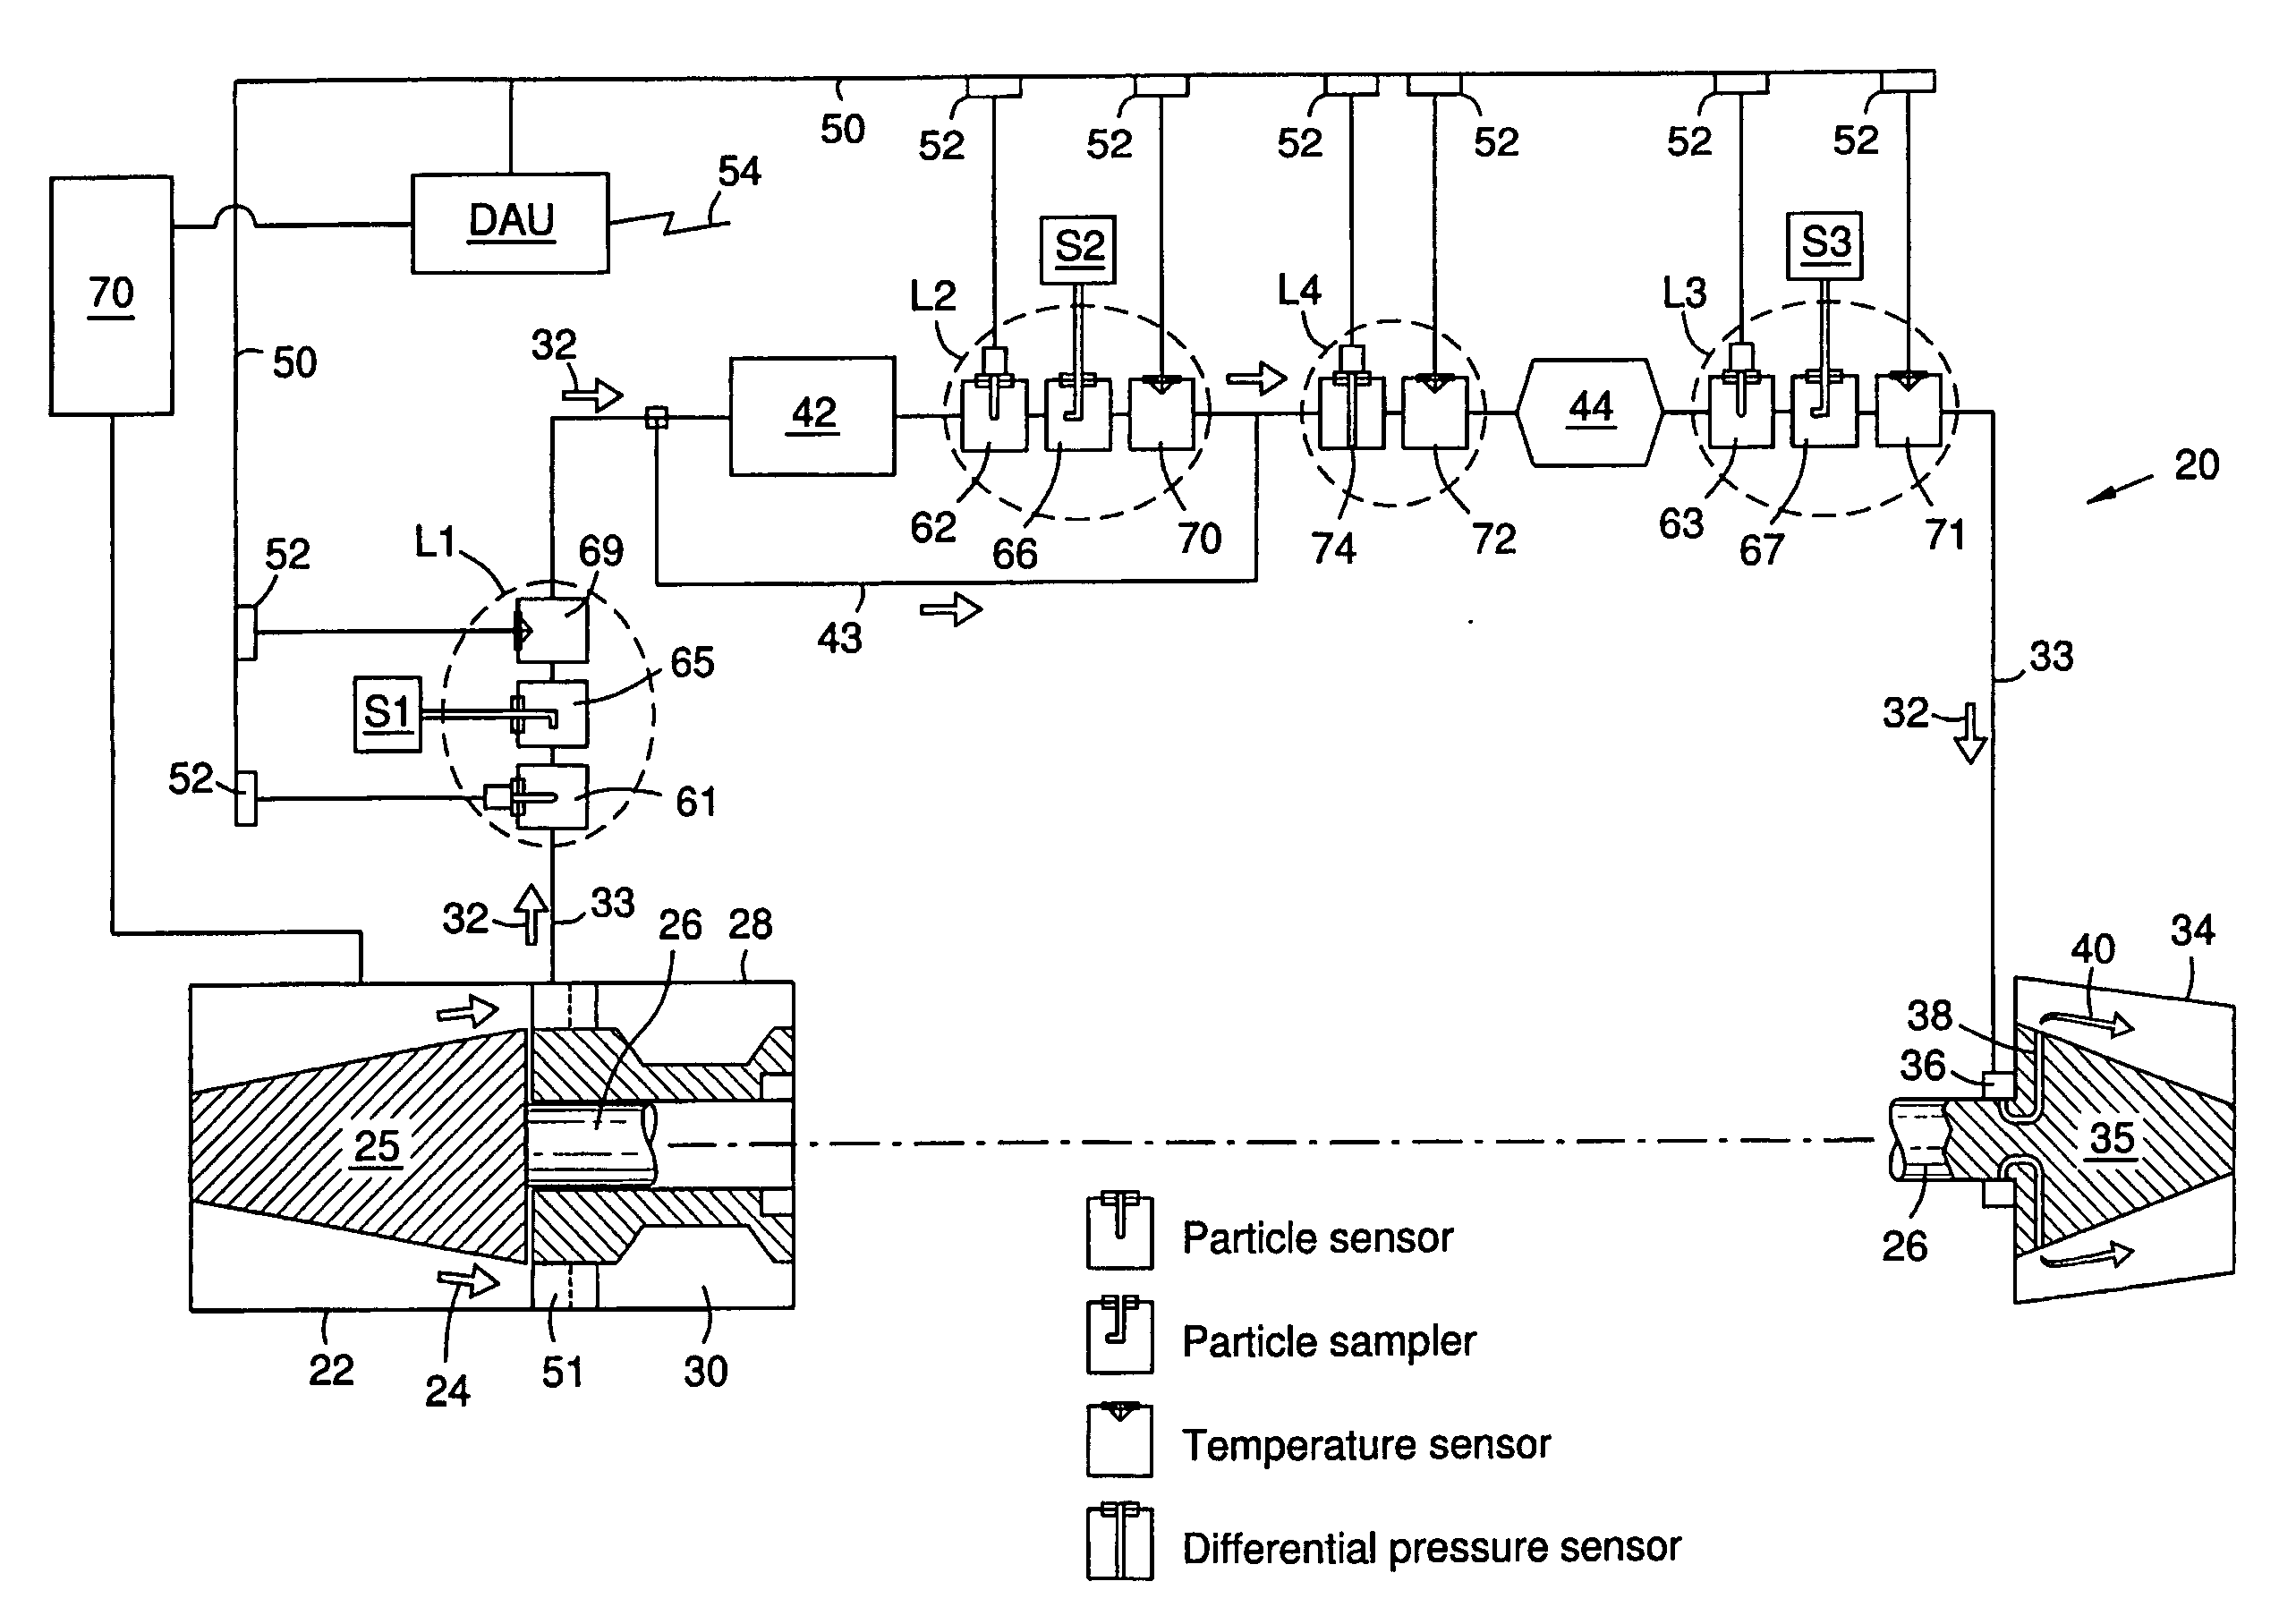 Method and apparatus for monitoring particles in a gas turbine working fluid